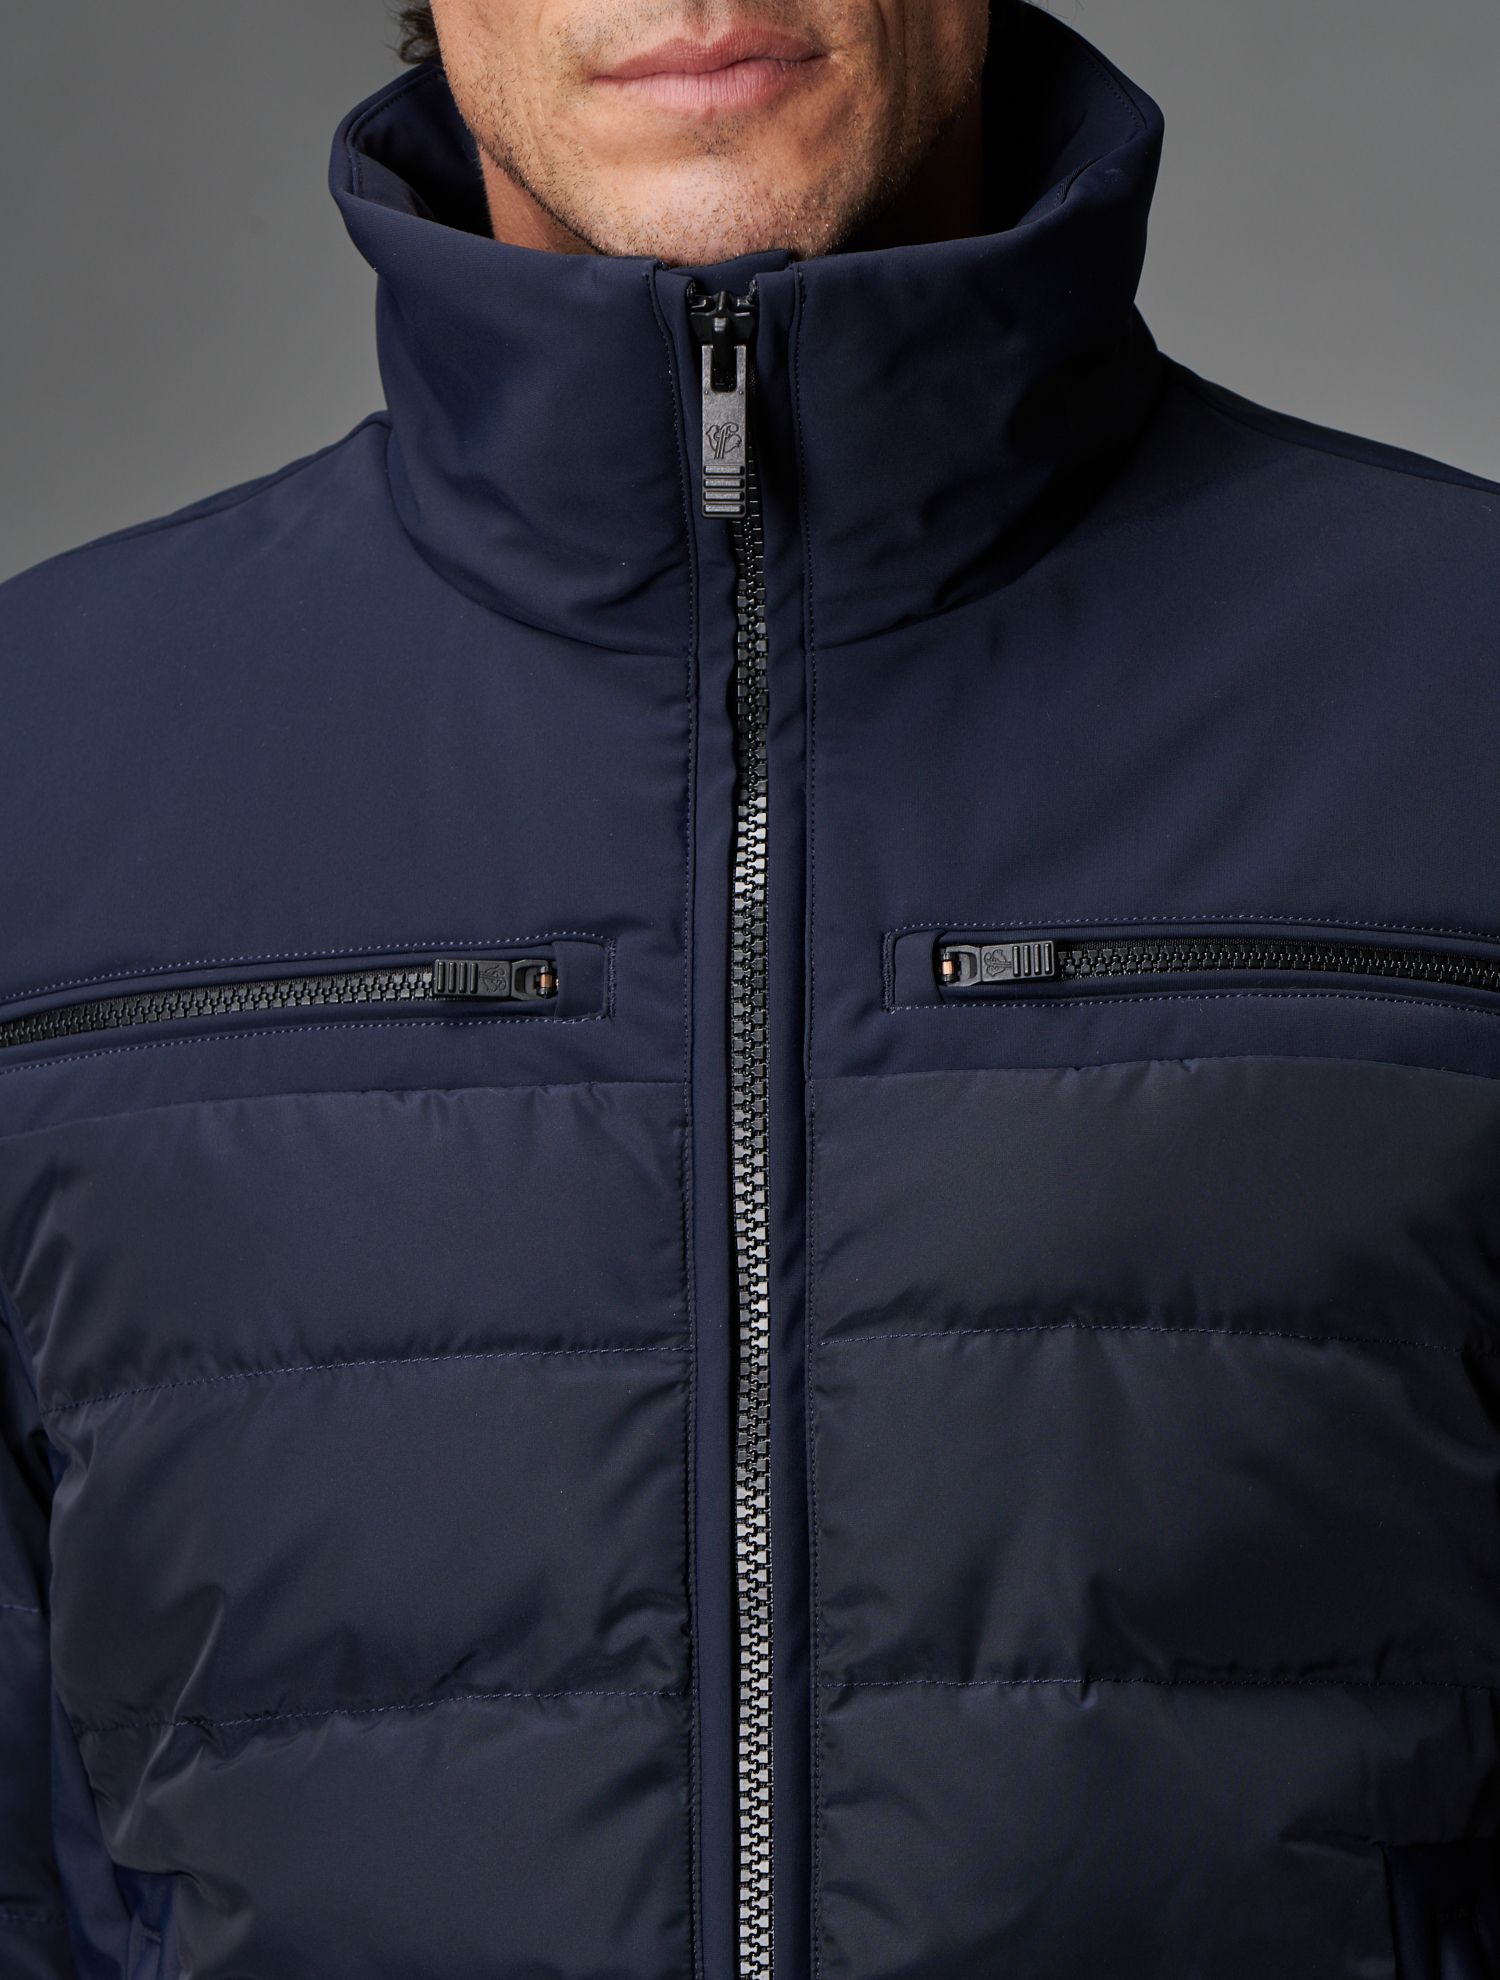 Fusalp - Ray jacket: quilted, lined men's jacket with five pockets